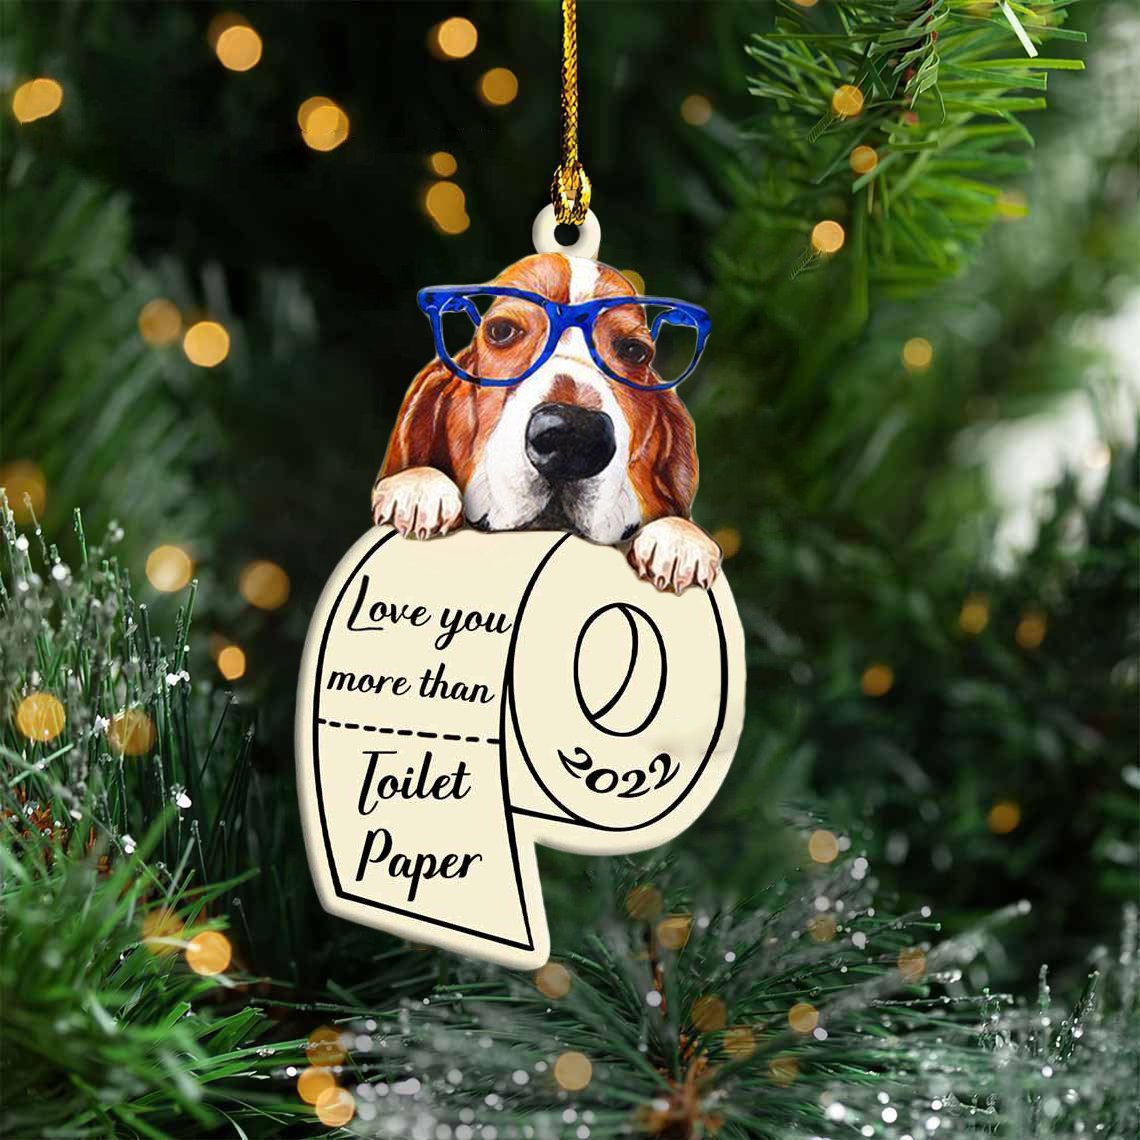 Basset Hound Love You More Than Toilet Paper 2022 Hanging Ornament